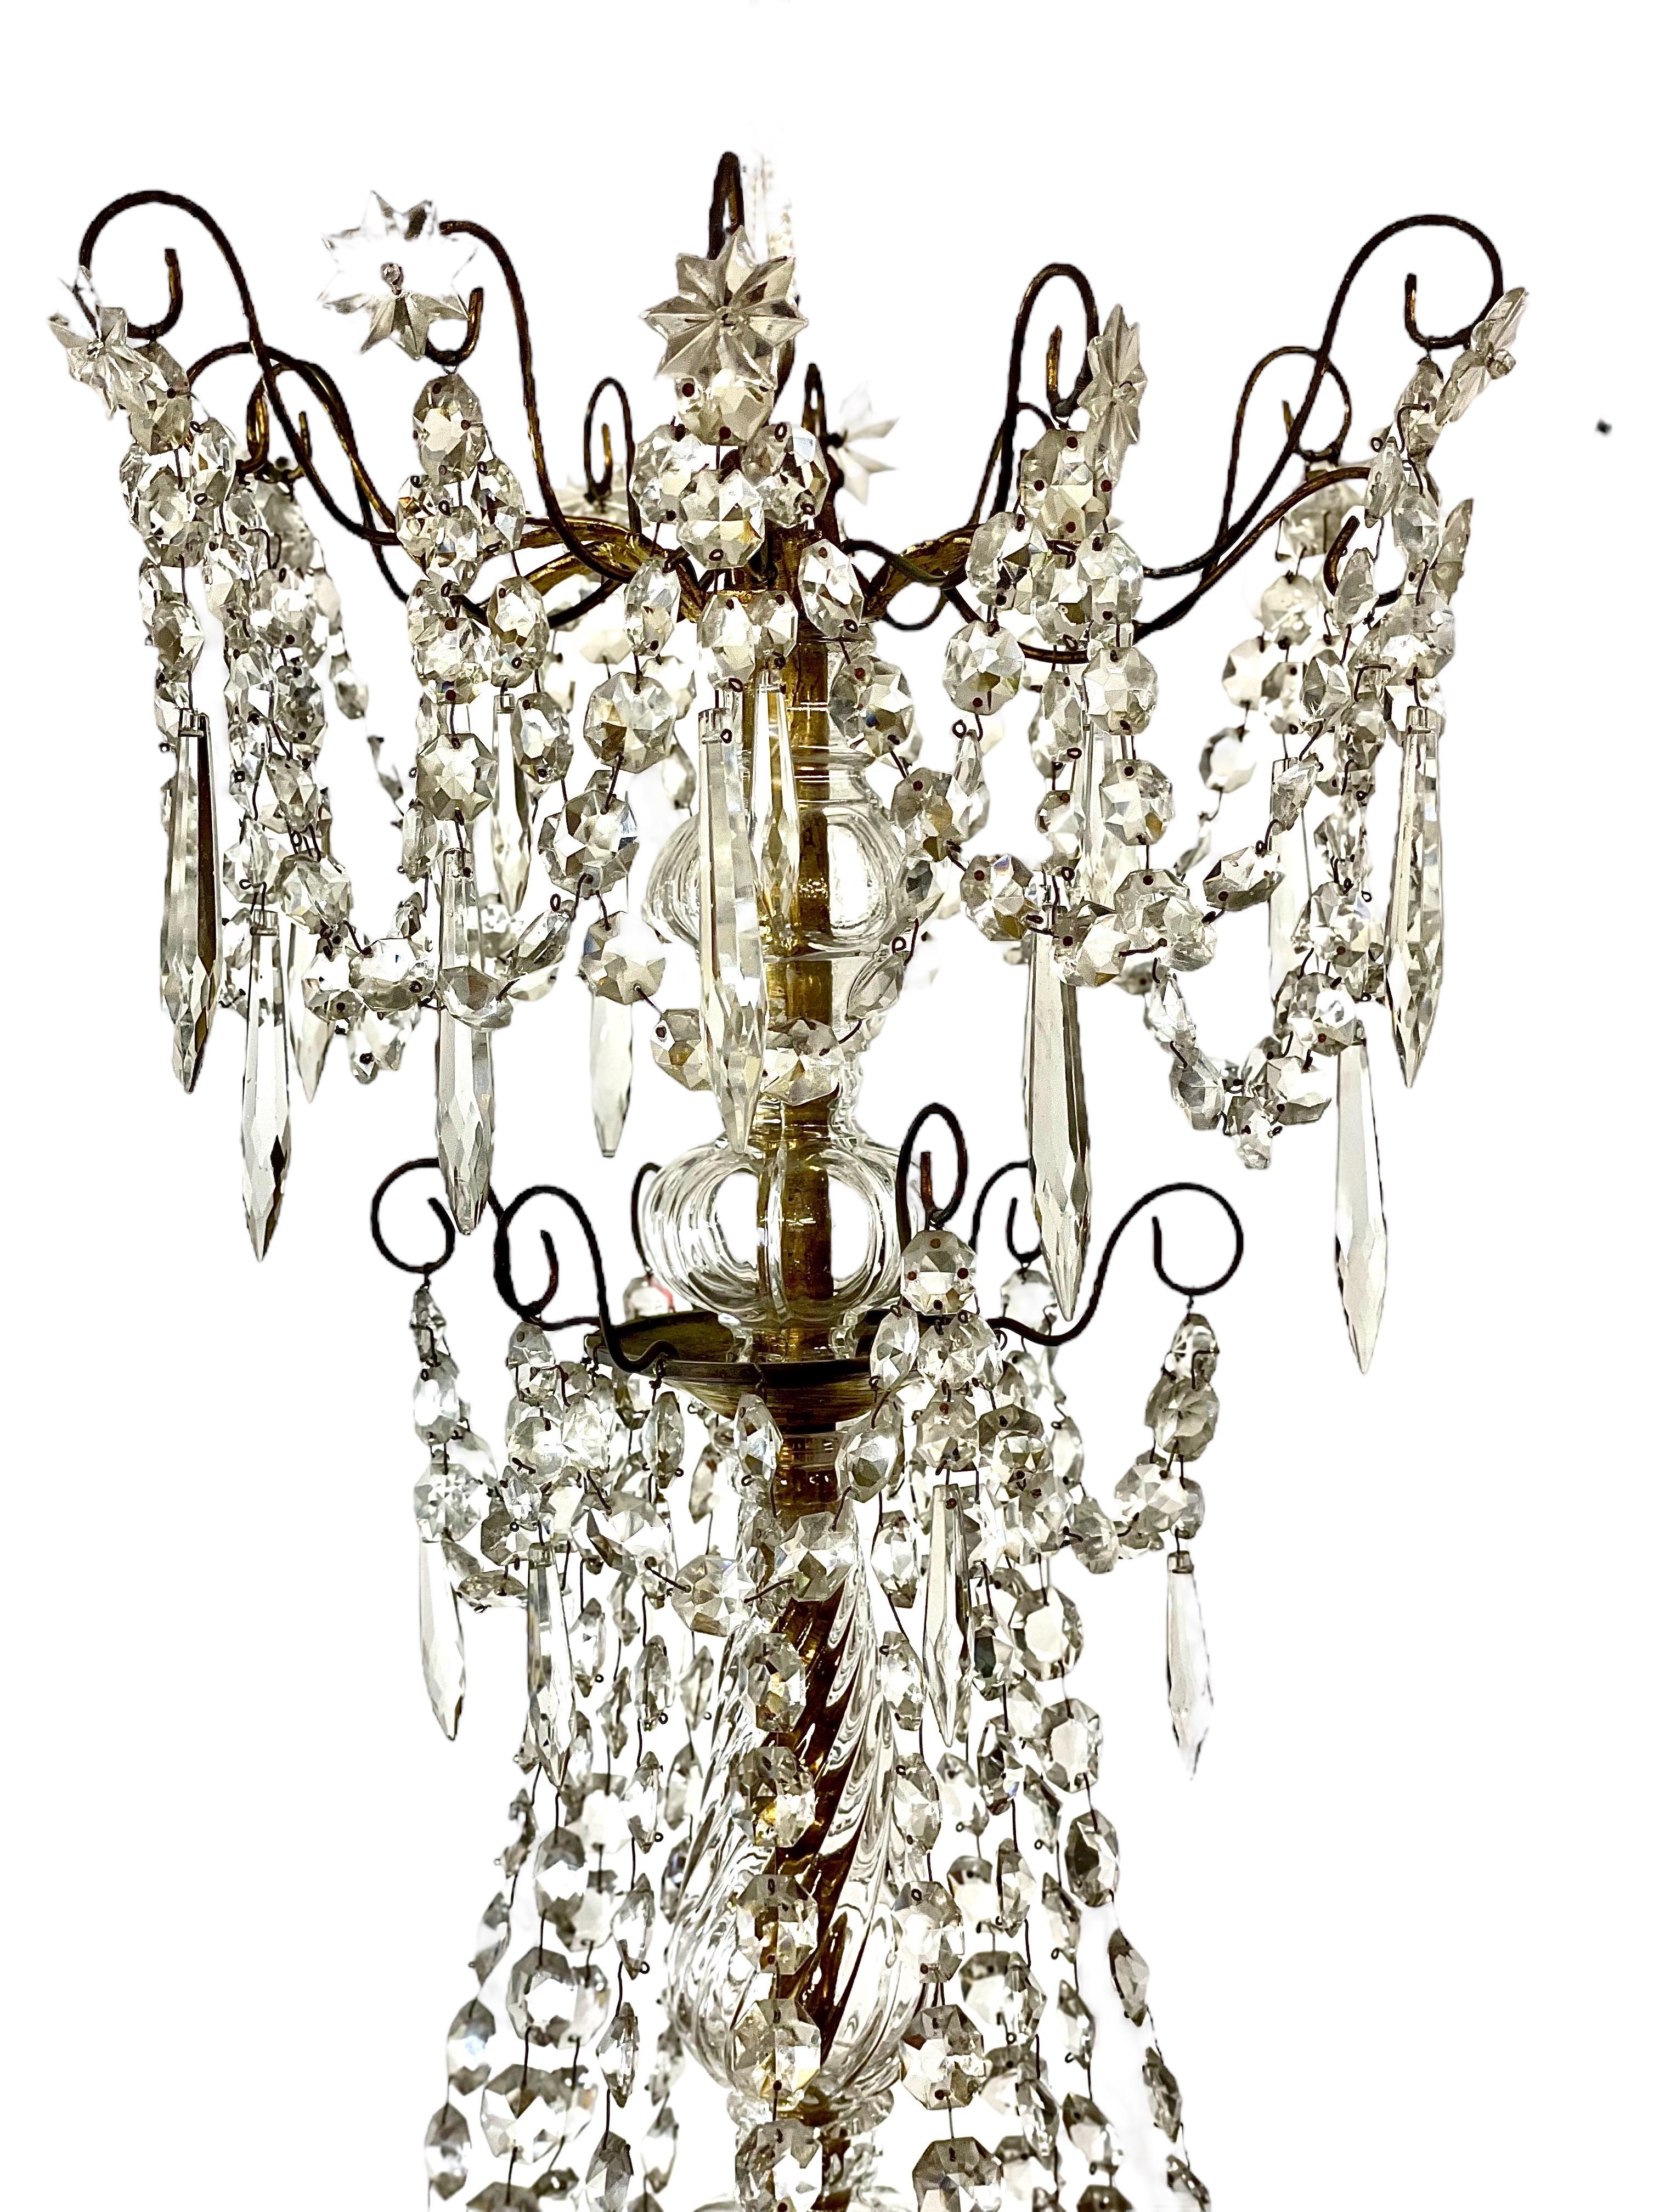 A glittering gilt brass, bronze and cut crystal tiered chandelier of twelve lights, dating from the second half of the 19th century. This truly magnificent piece features a crisply cut central baluster stem, from which twelve delicately curved